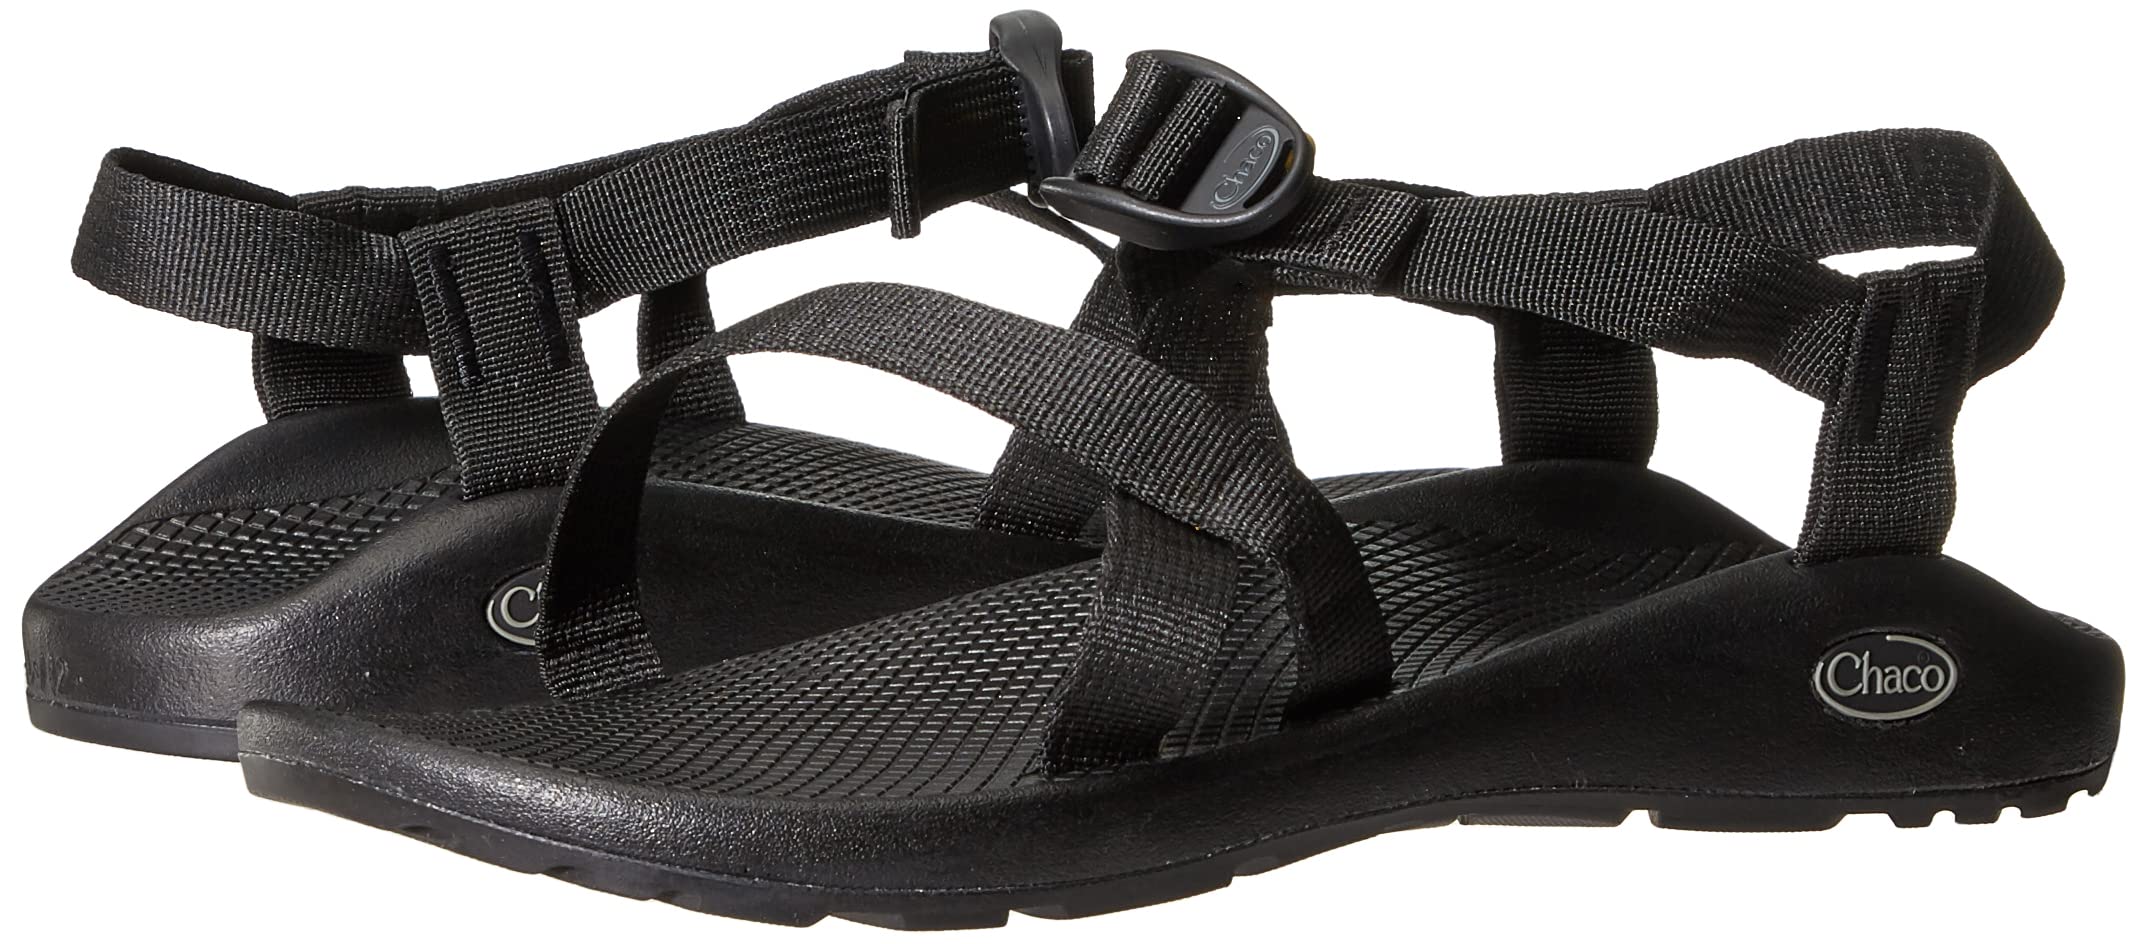 Chaco Mens Z/1 Classic, Outdoor Sandal